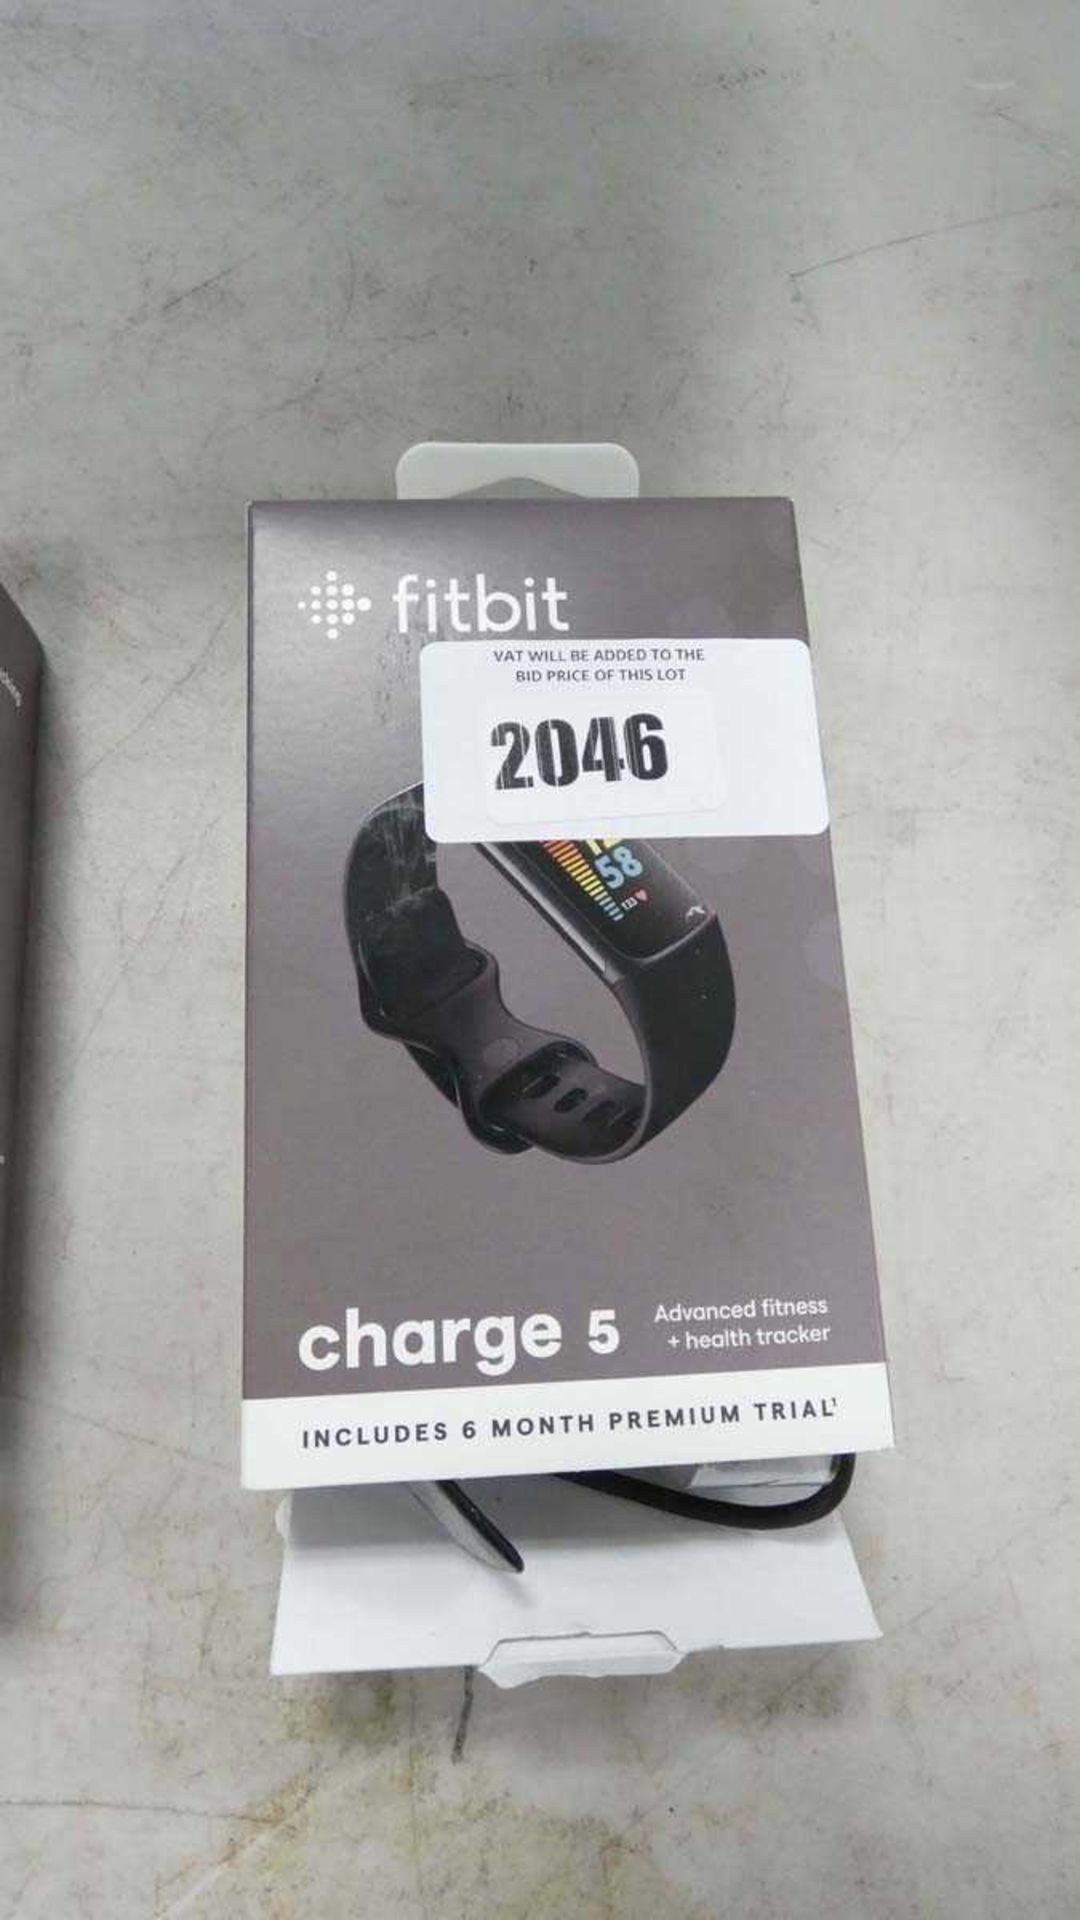 +VAT Fitbit Charge 5 fitness tracker in box